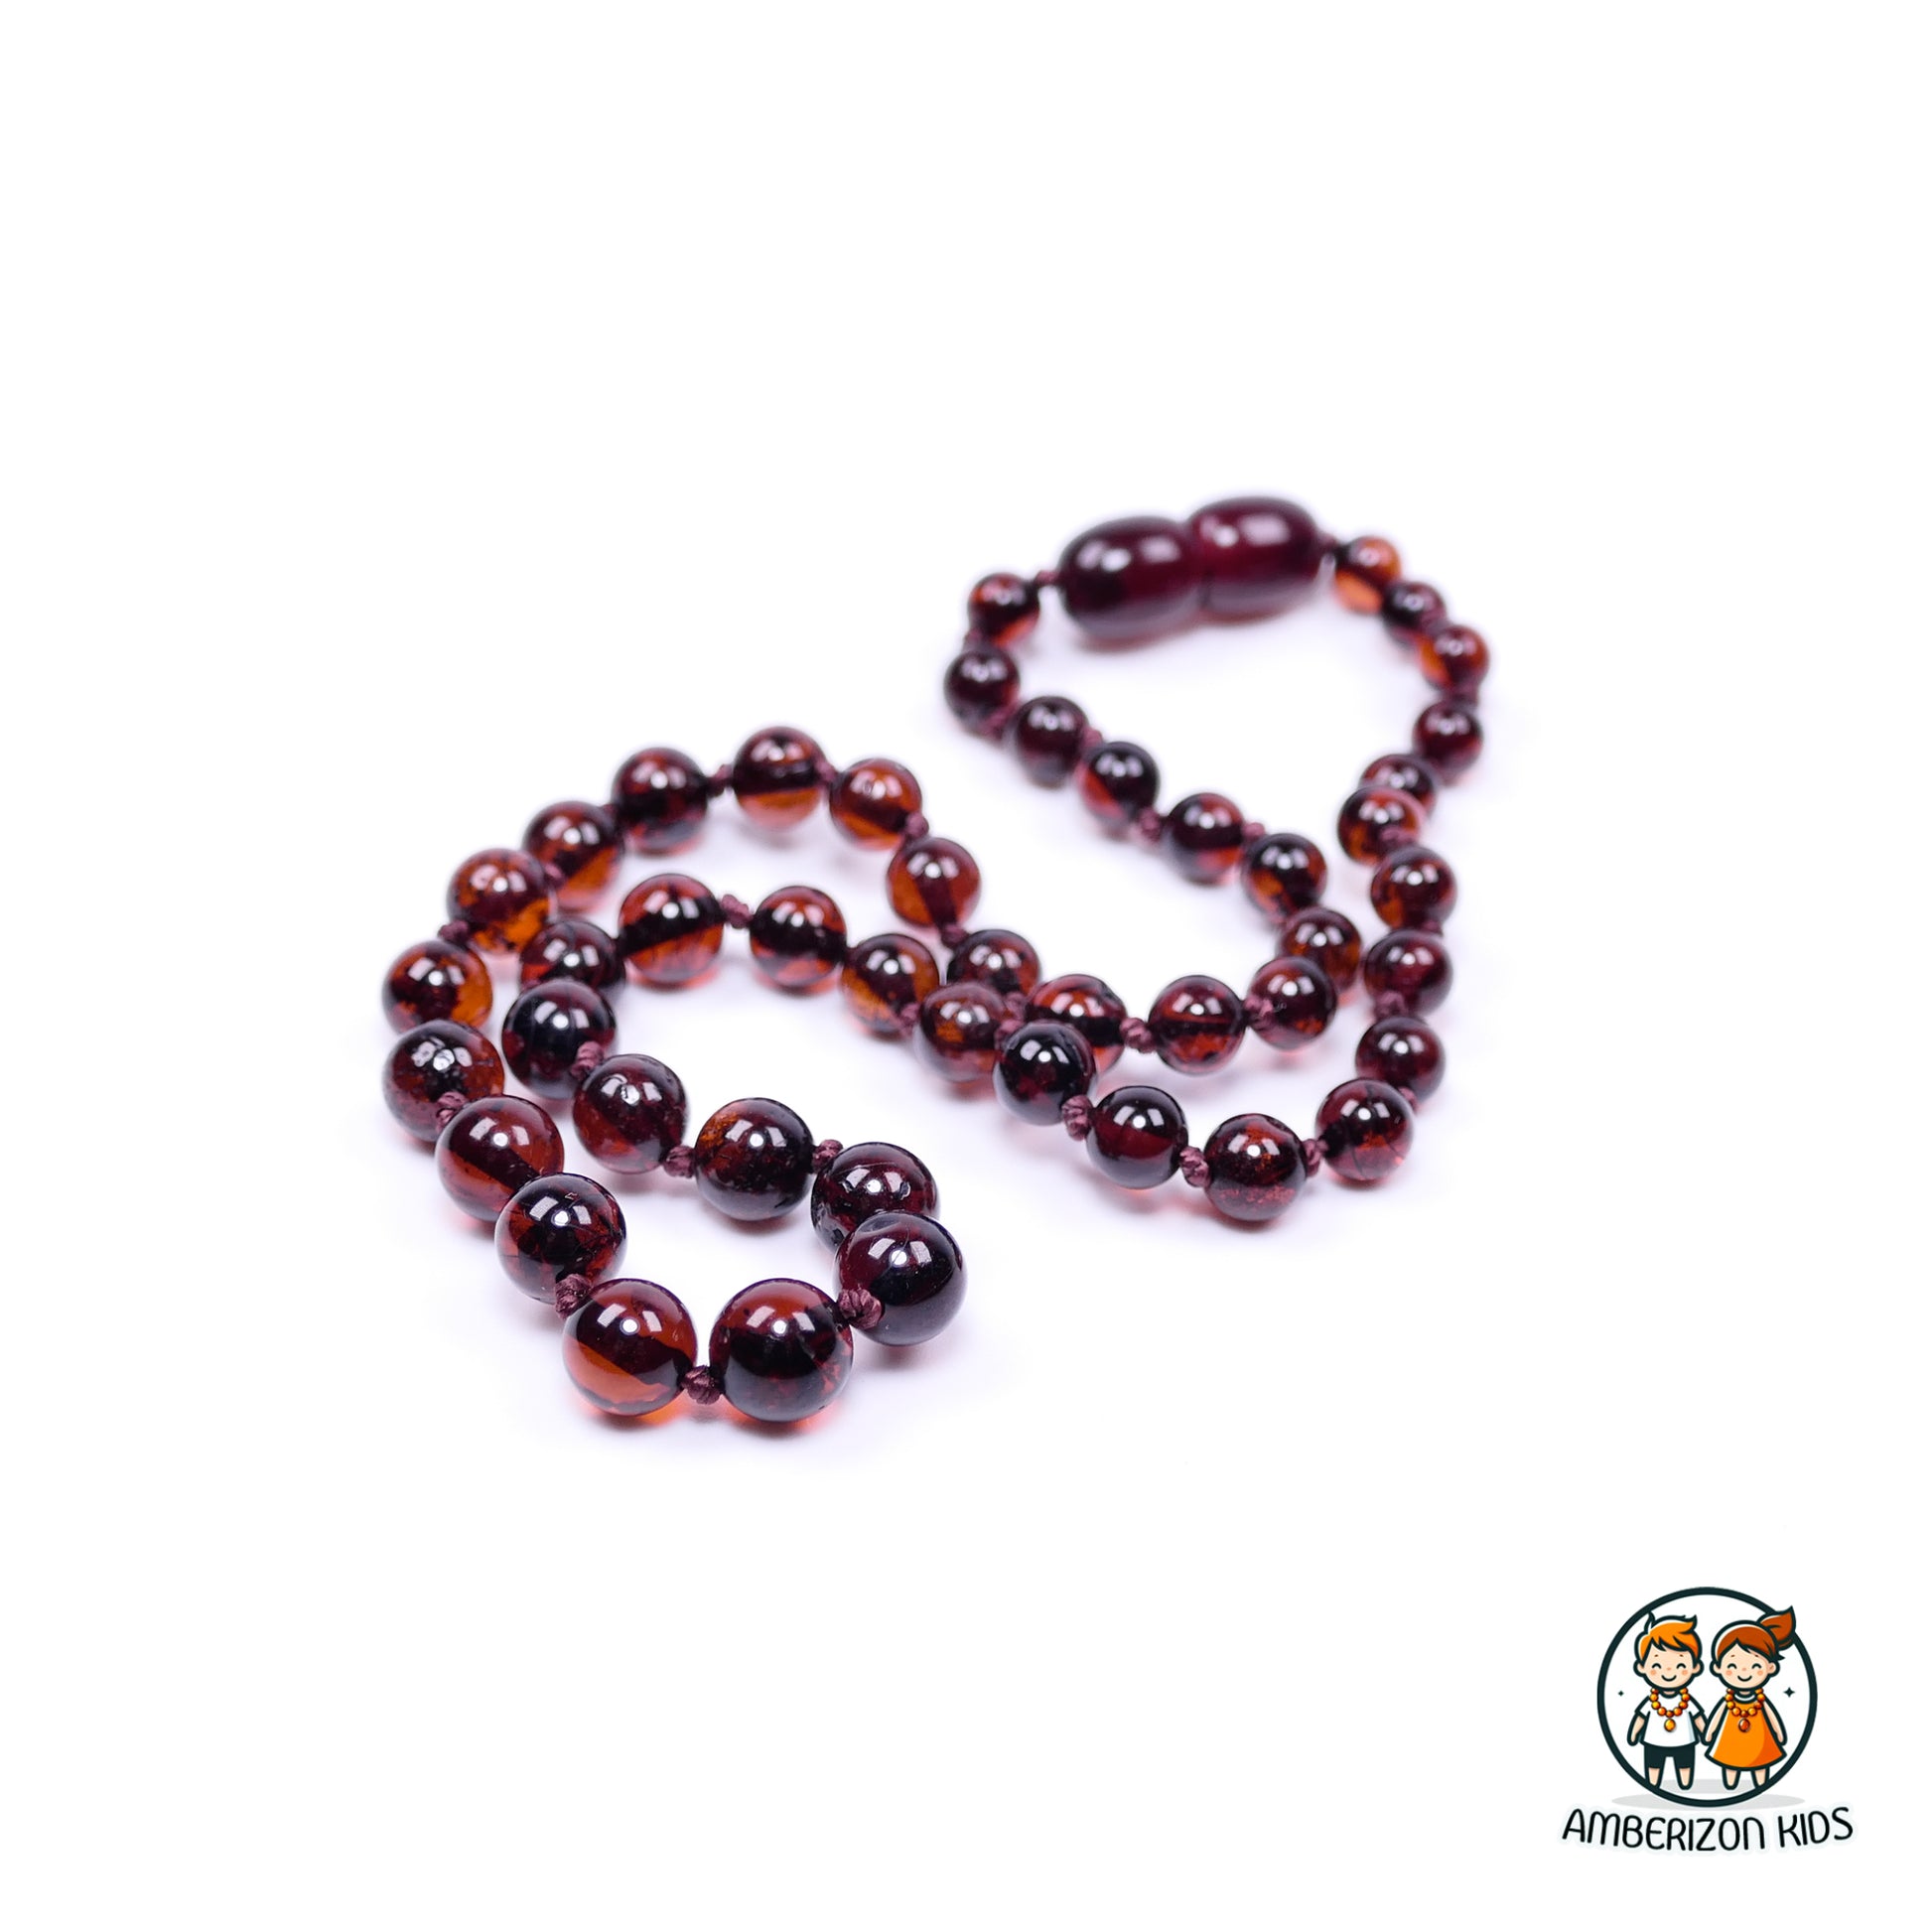 Cherry Baltic amber necklace for teething - Round amber beads (balls)